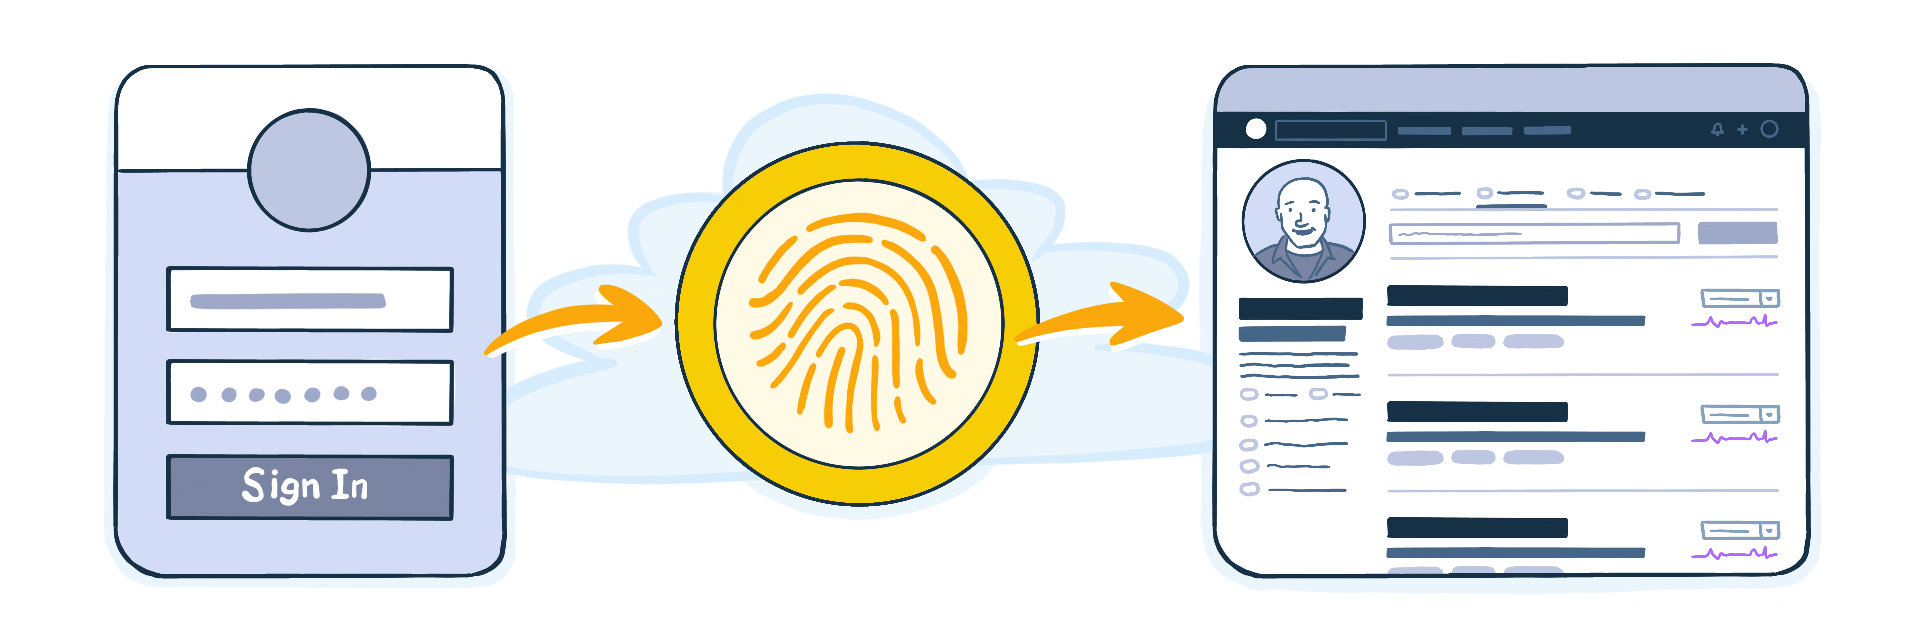 An illustration of a sign in widget sending a user to the okta sso authentication experience and then on to the app experience.